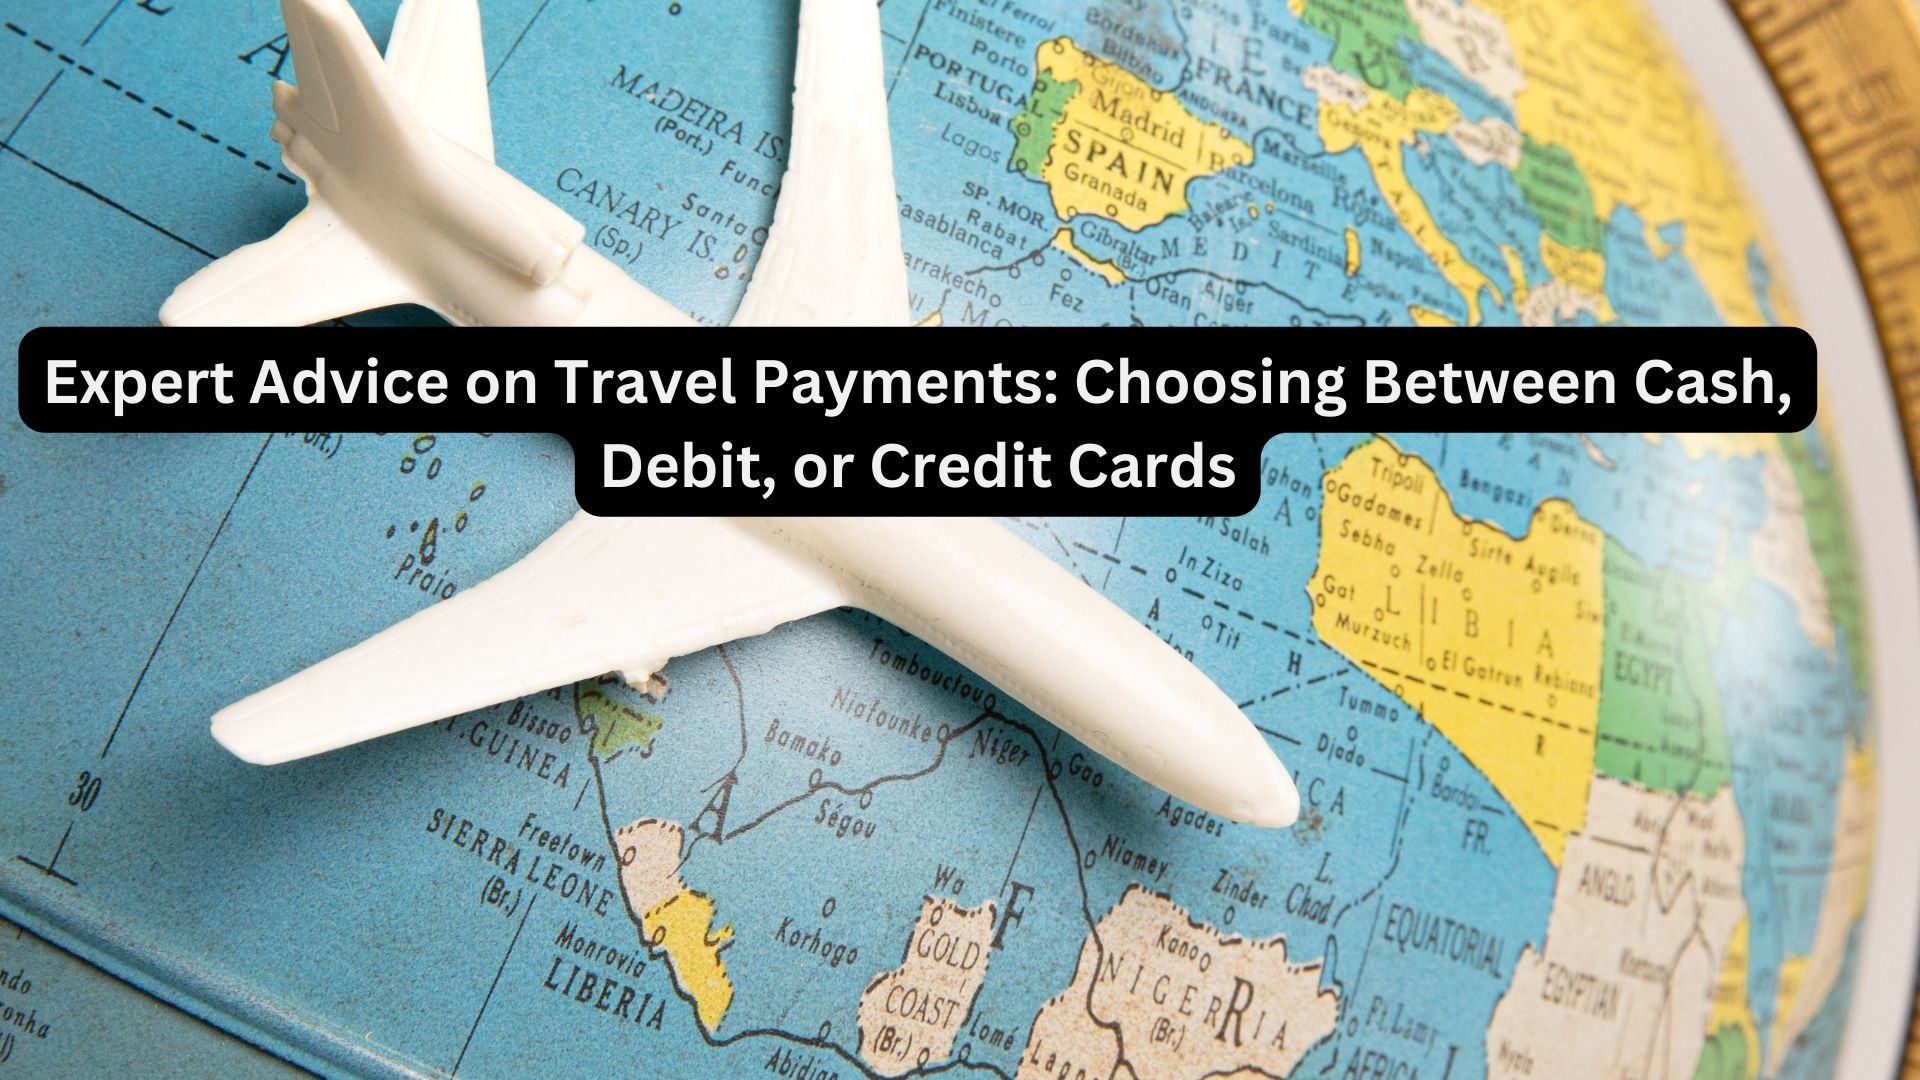 Expert Advice on Travel Payments: Choosing Between Cash, Debit, or Credit Cards